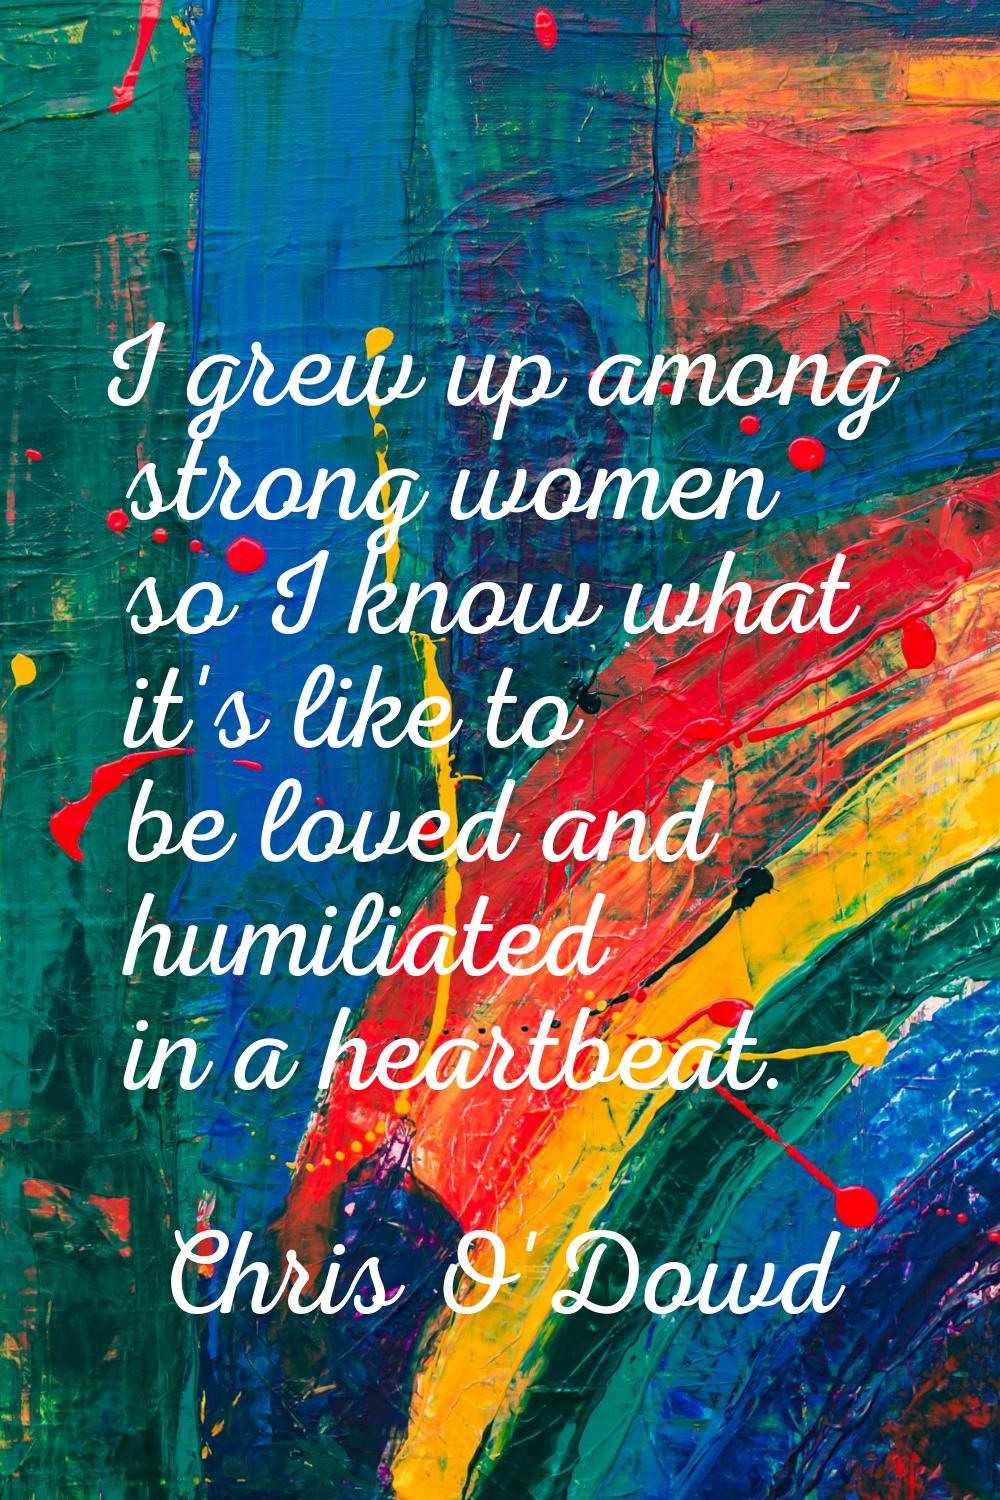 I grew up among strong women so I know what it's like to be loved and humiliated in a heartbeat.